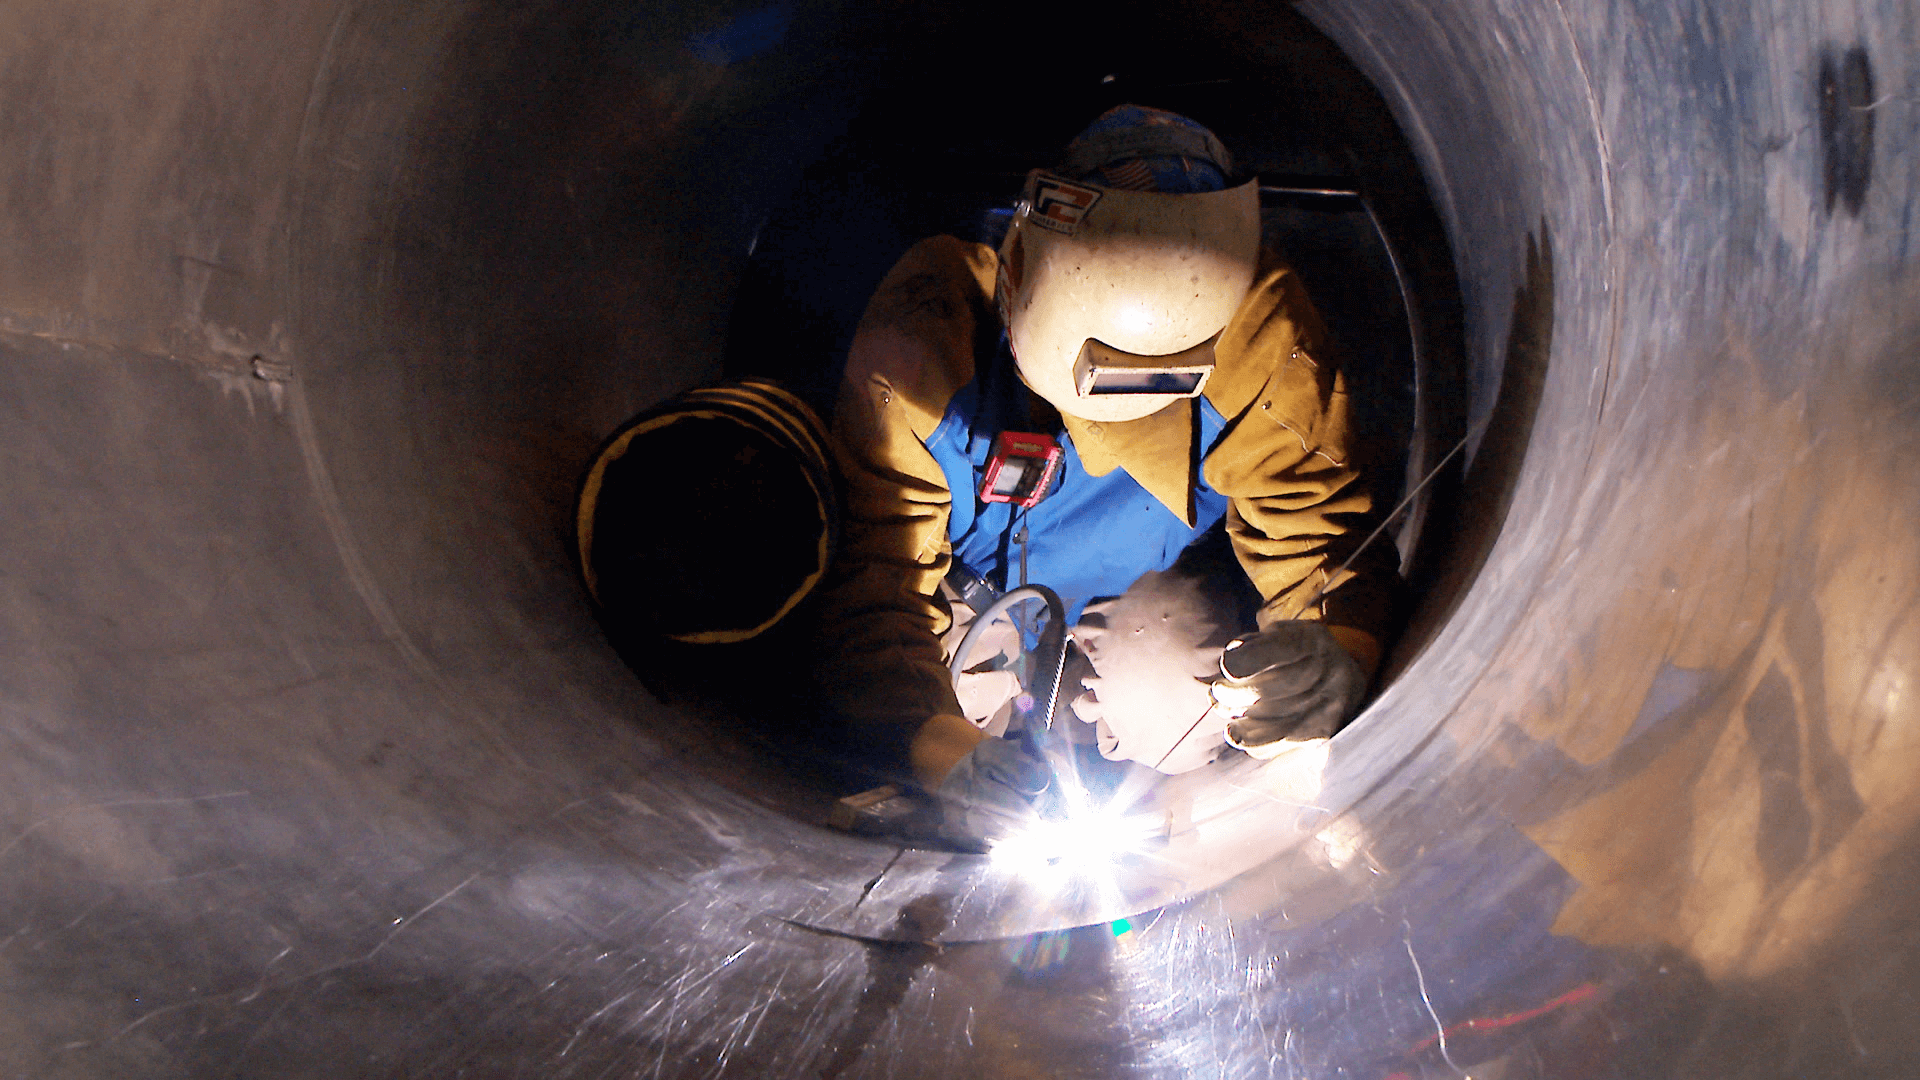 Welding in a confined space